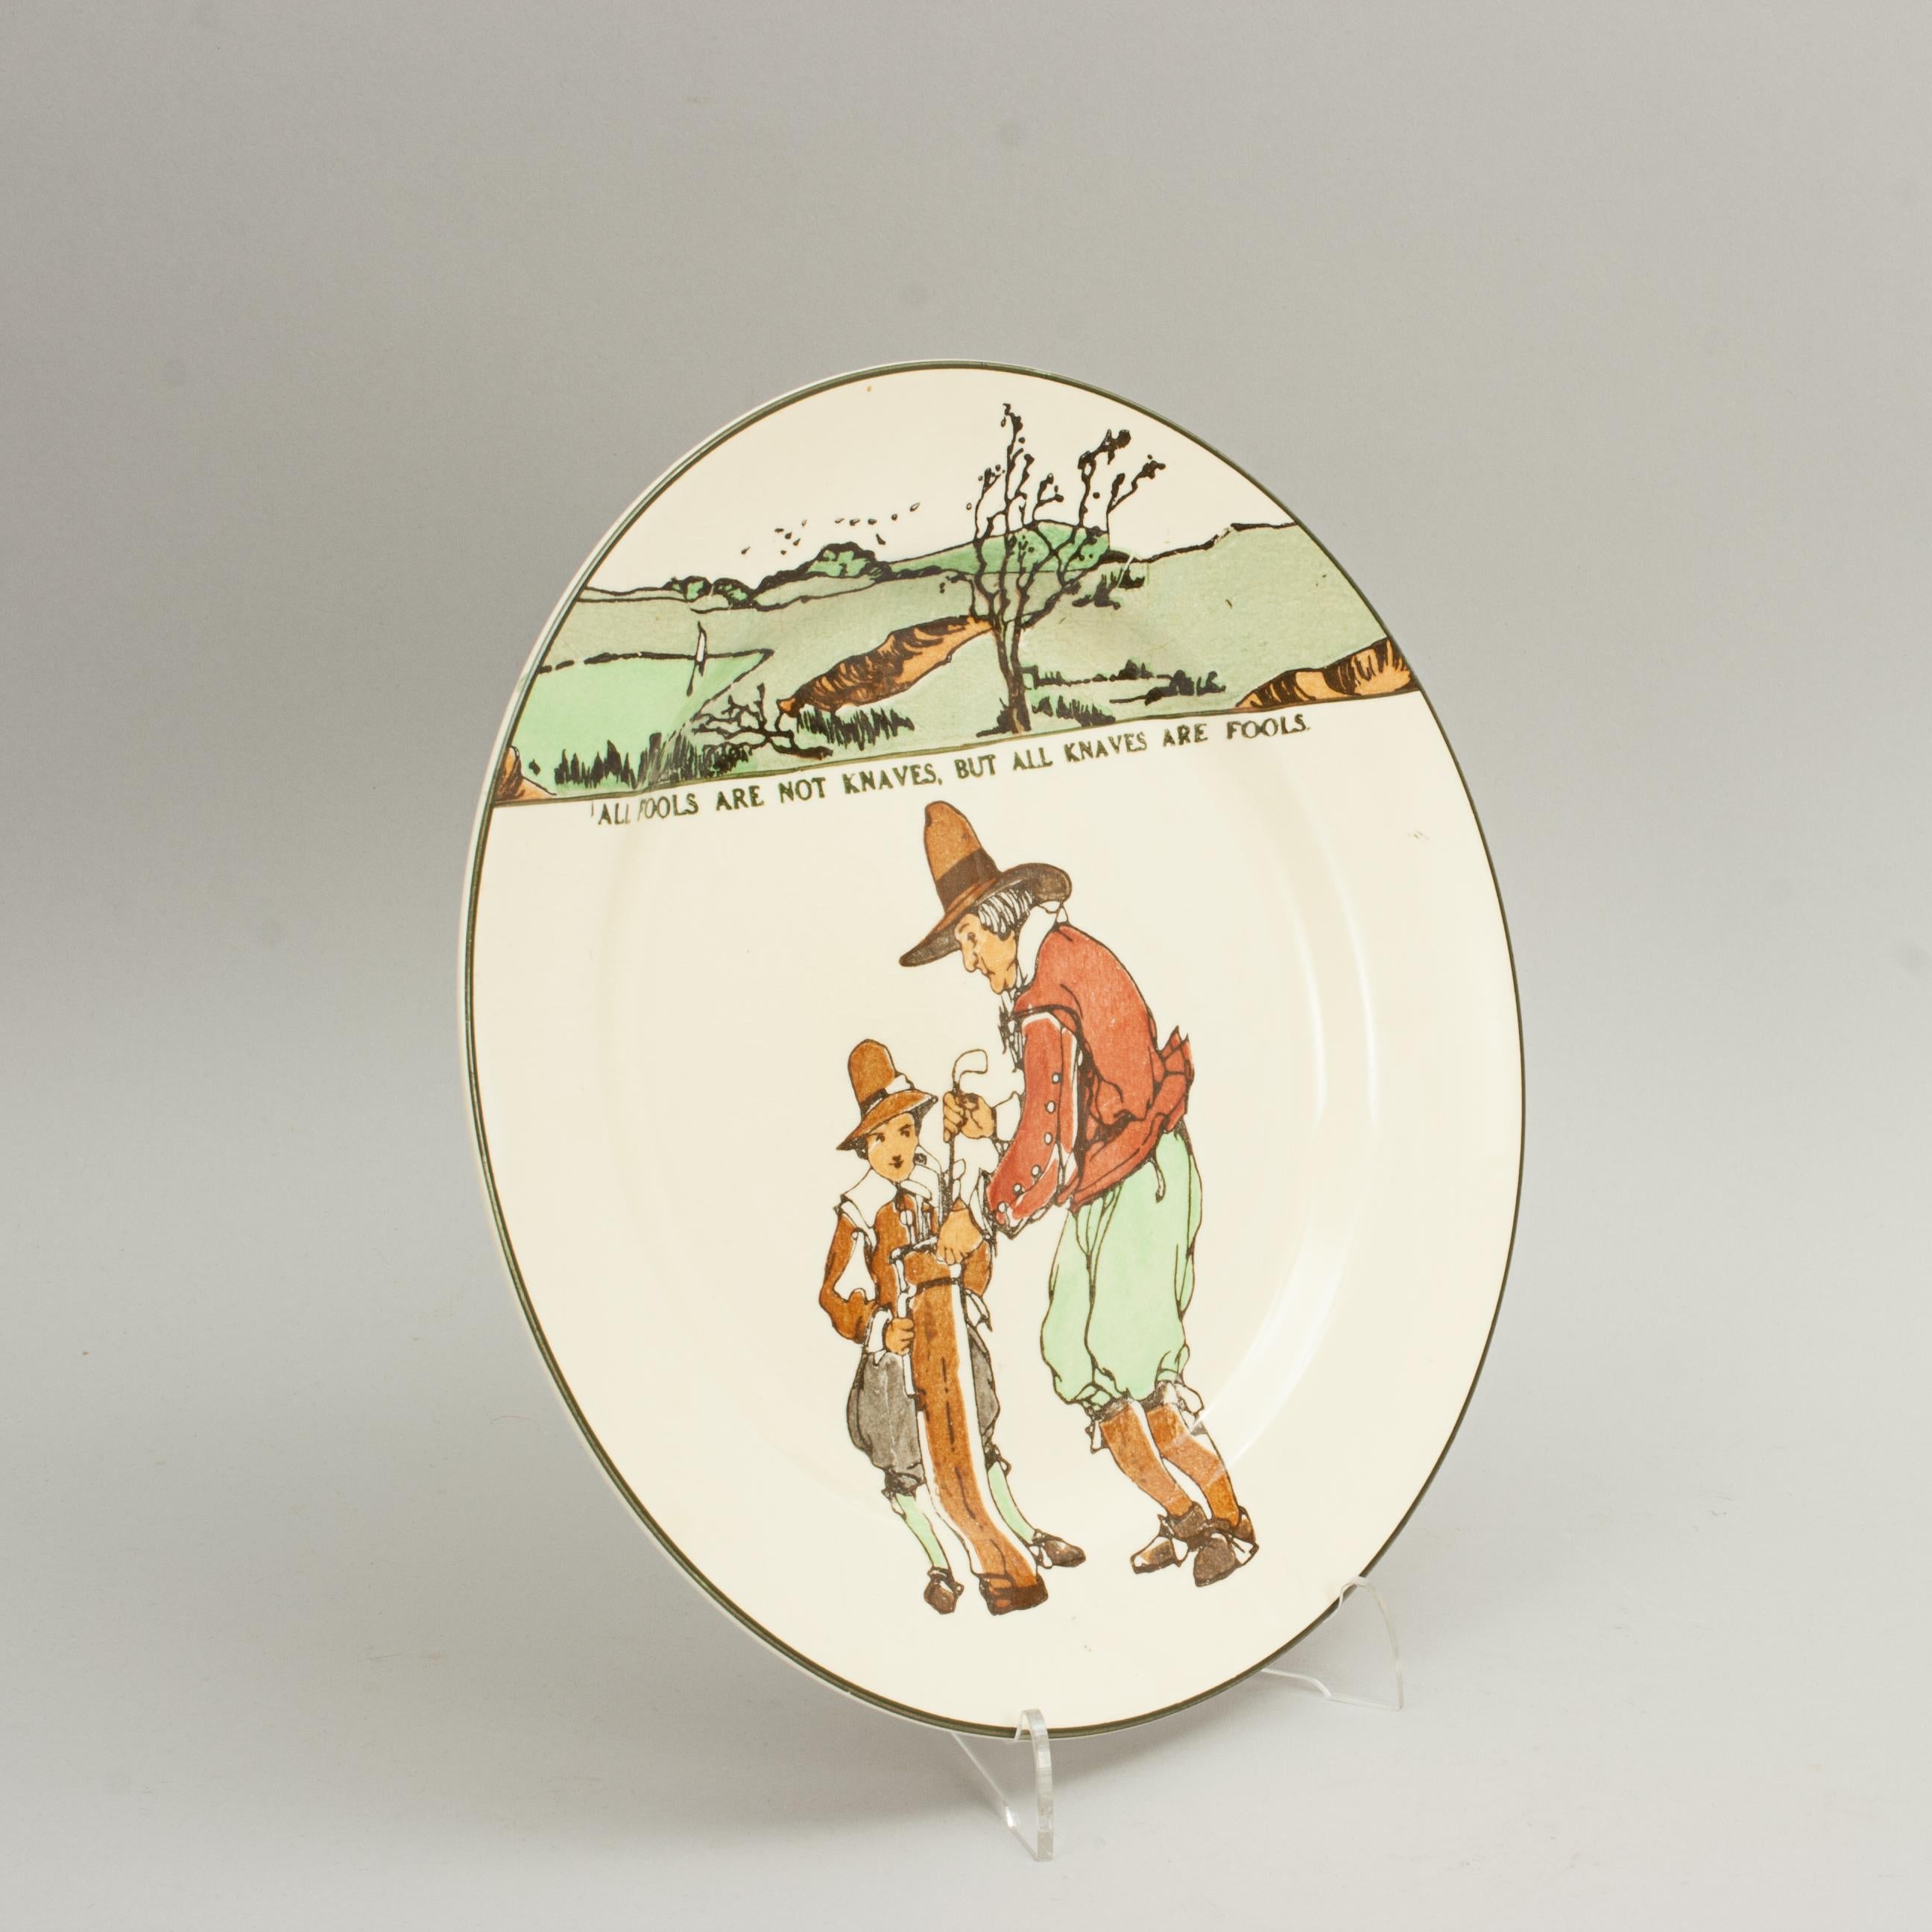 Royal Doulton Series Ware Golf plate.
Royal Doulton rack plate with polychrome golf scene and the proverb, 